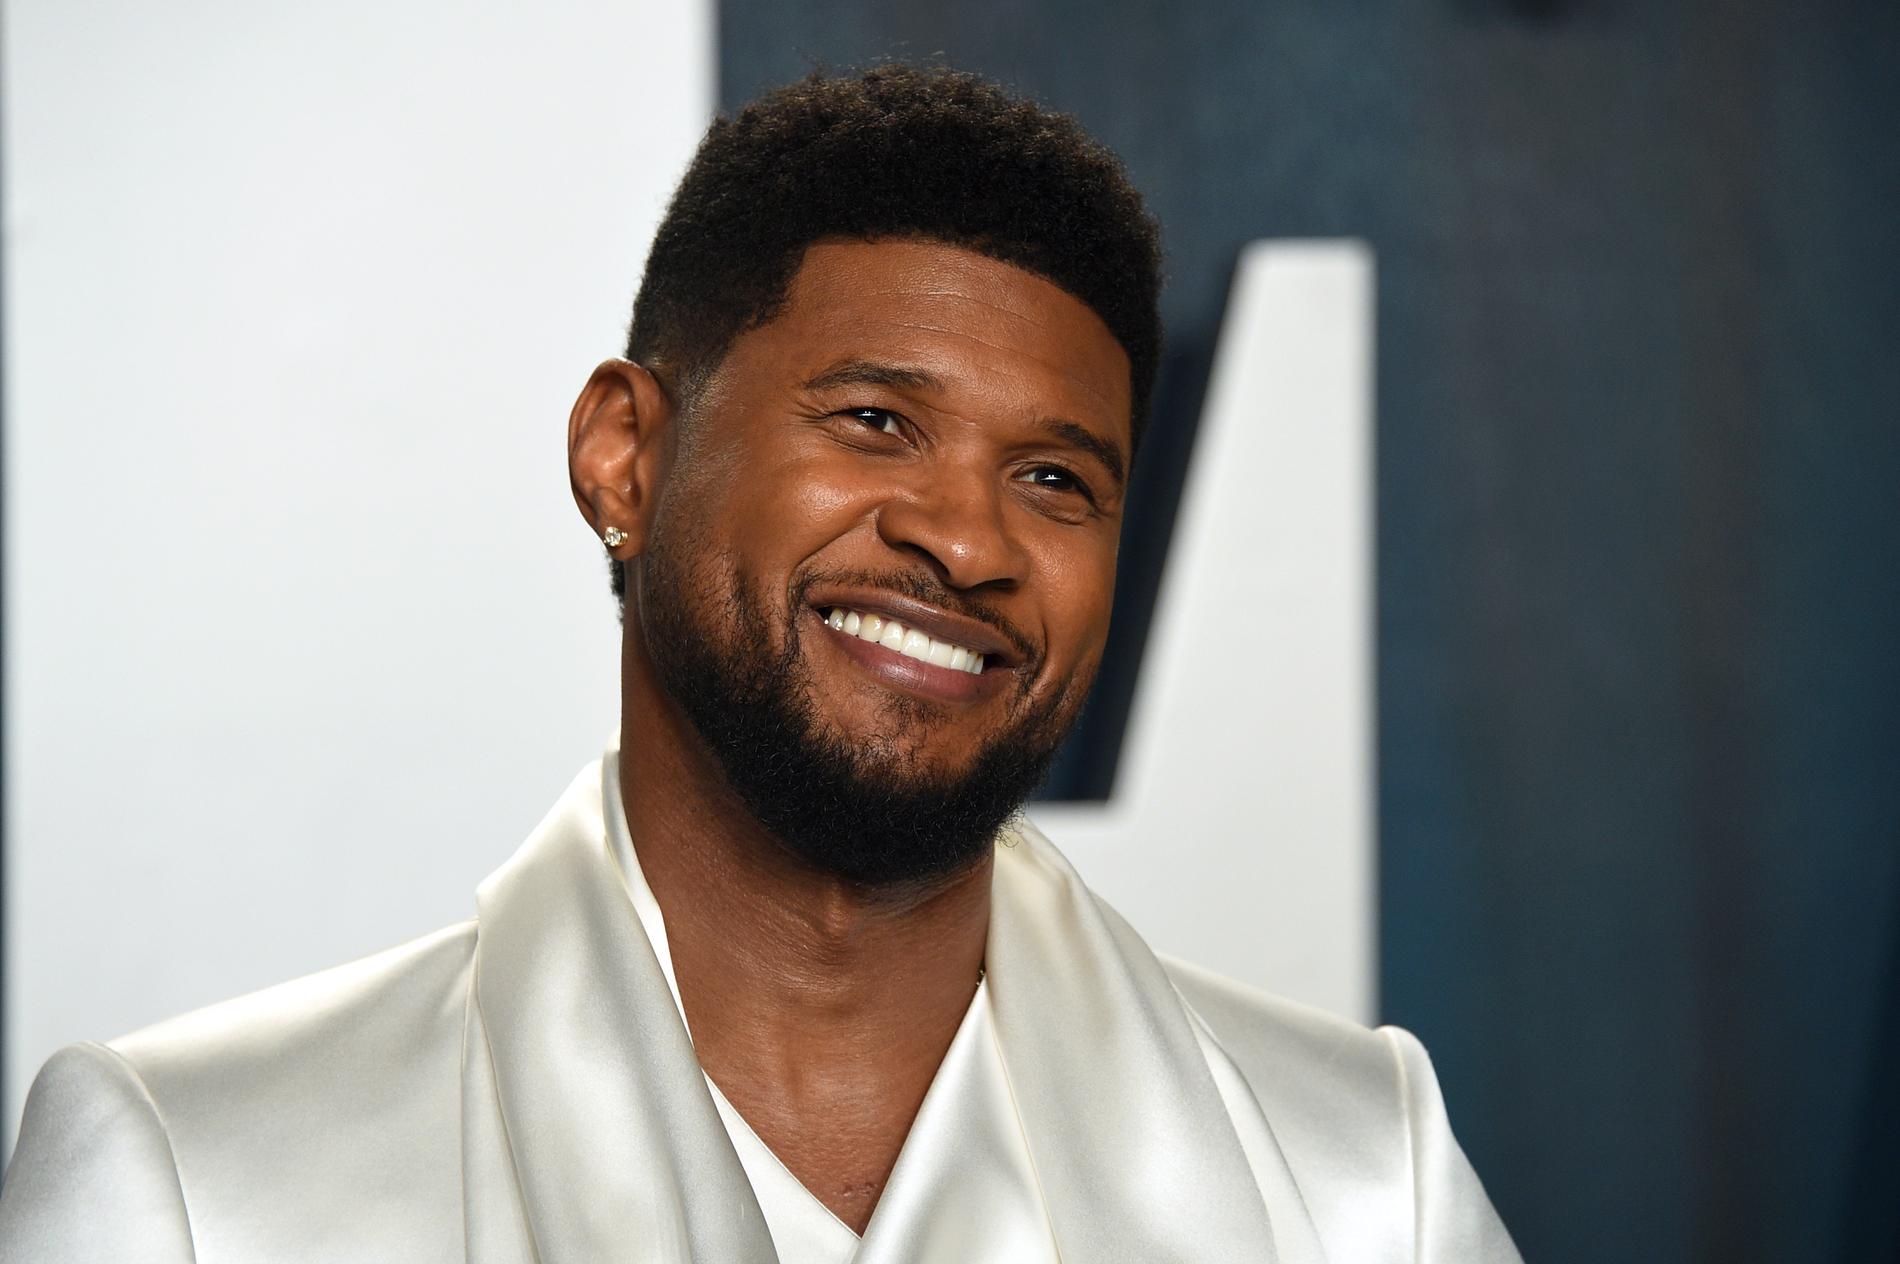 Usher will be the main attraction during the Super Bowl halftime